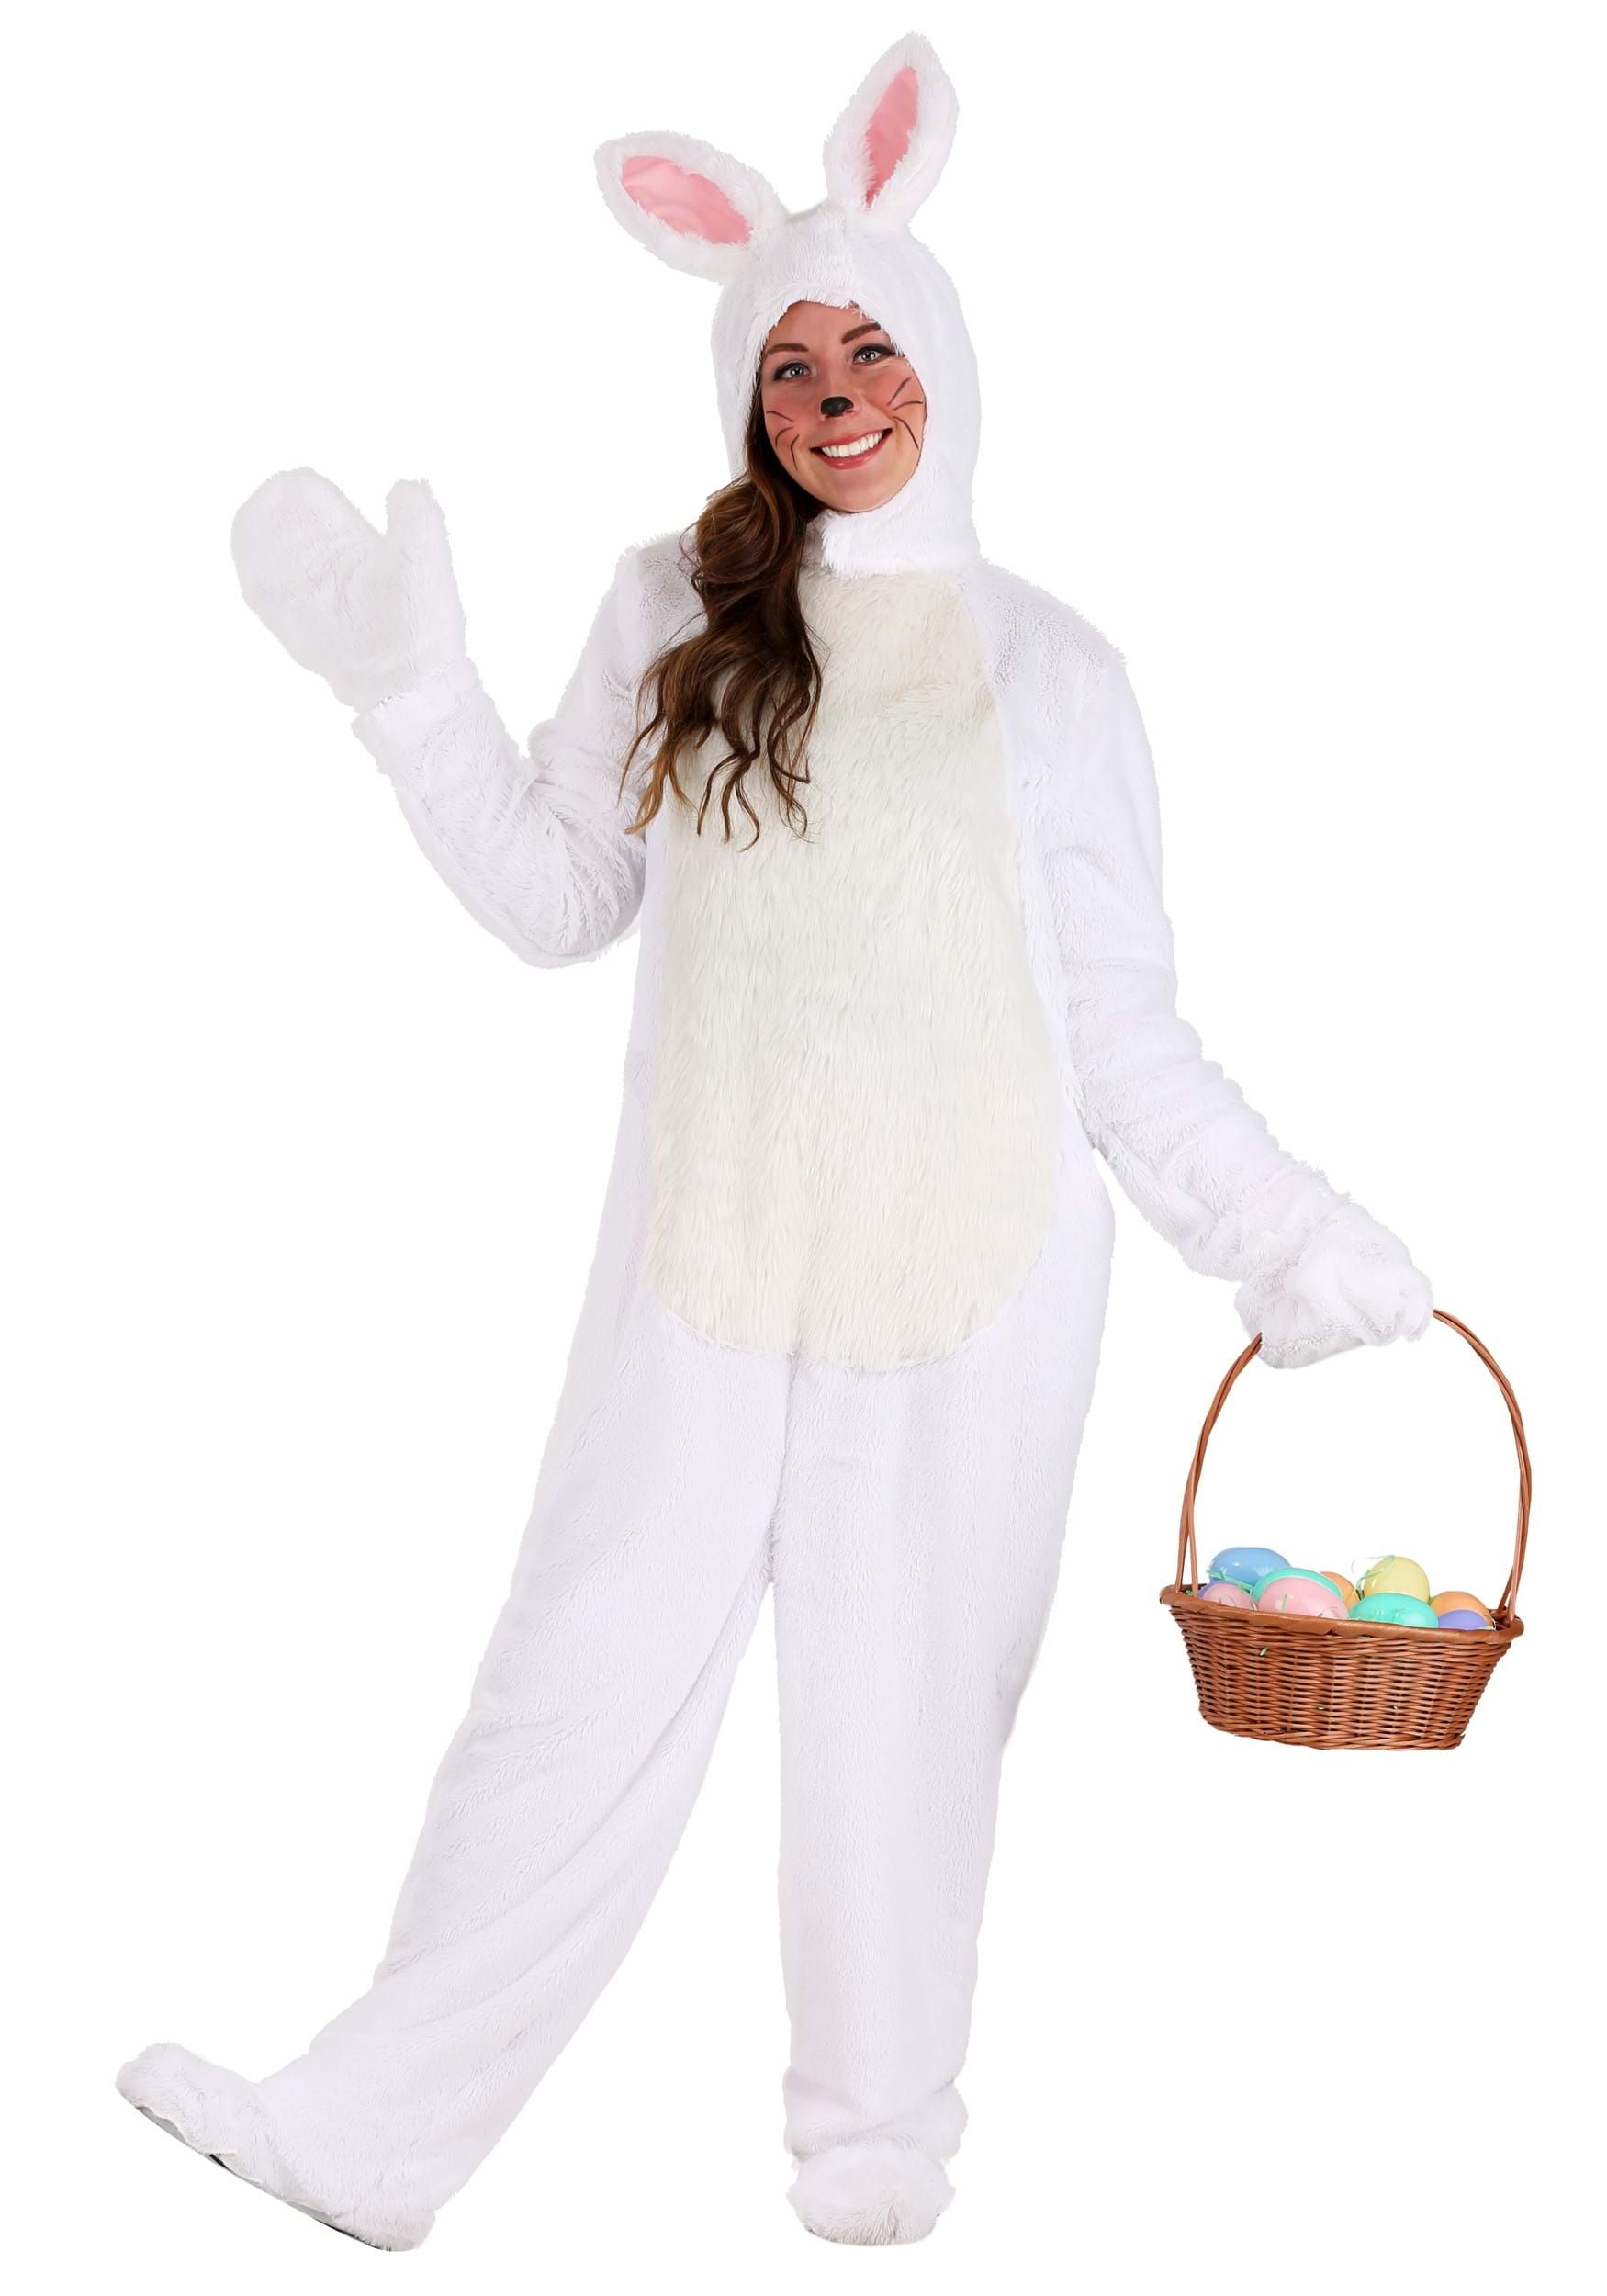 Photos - Fancy Dress FUN Costumes White Bunny Adult Costume Pink/White